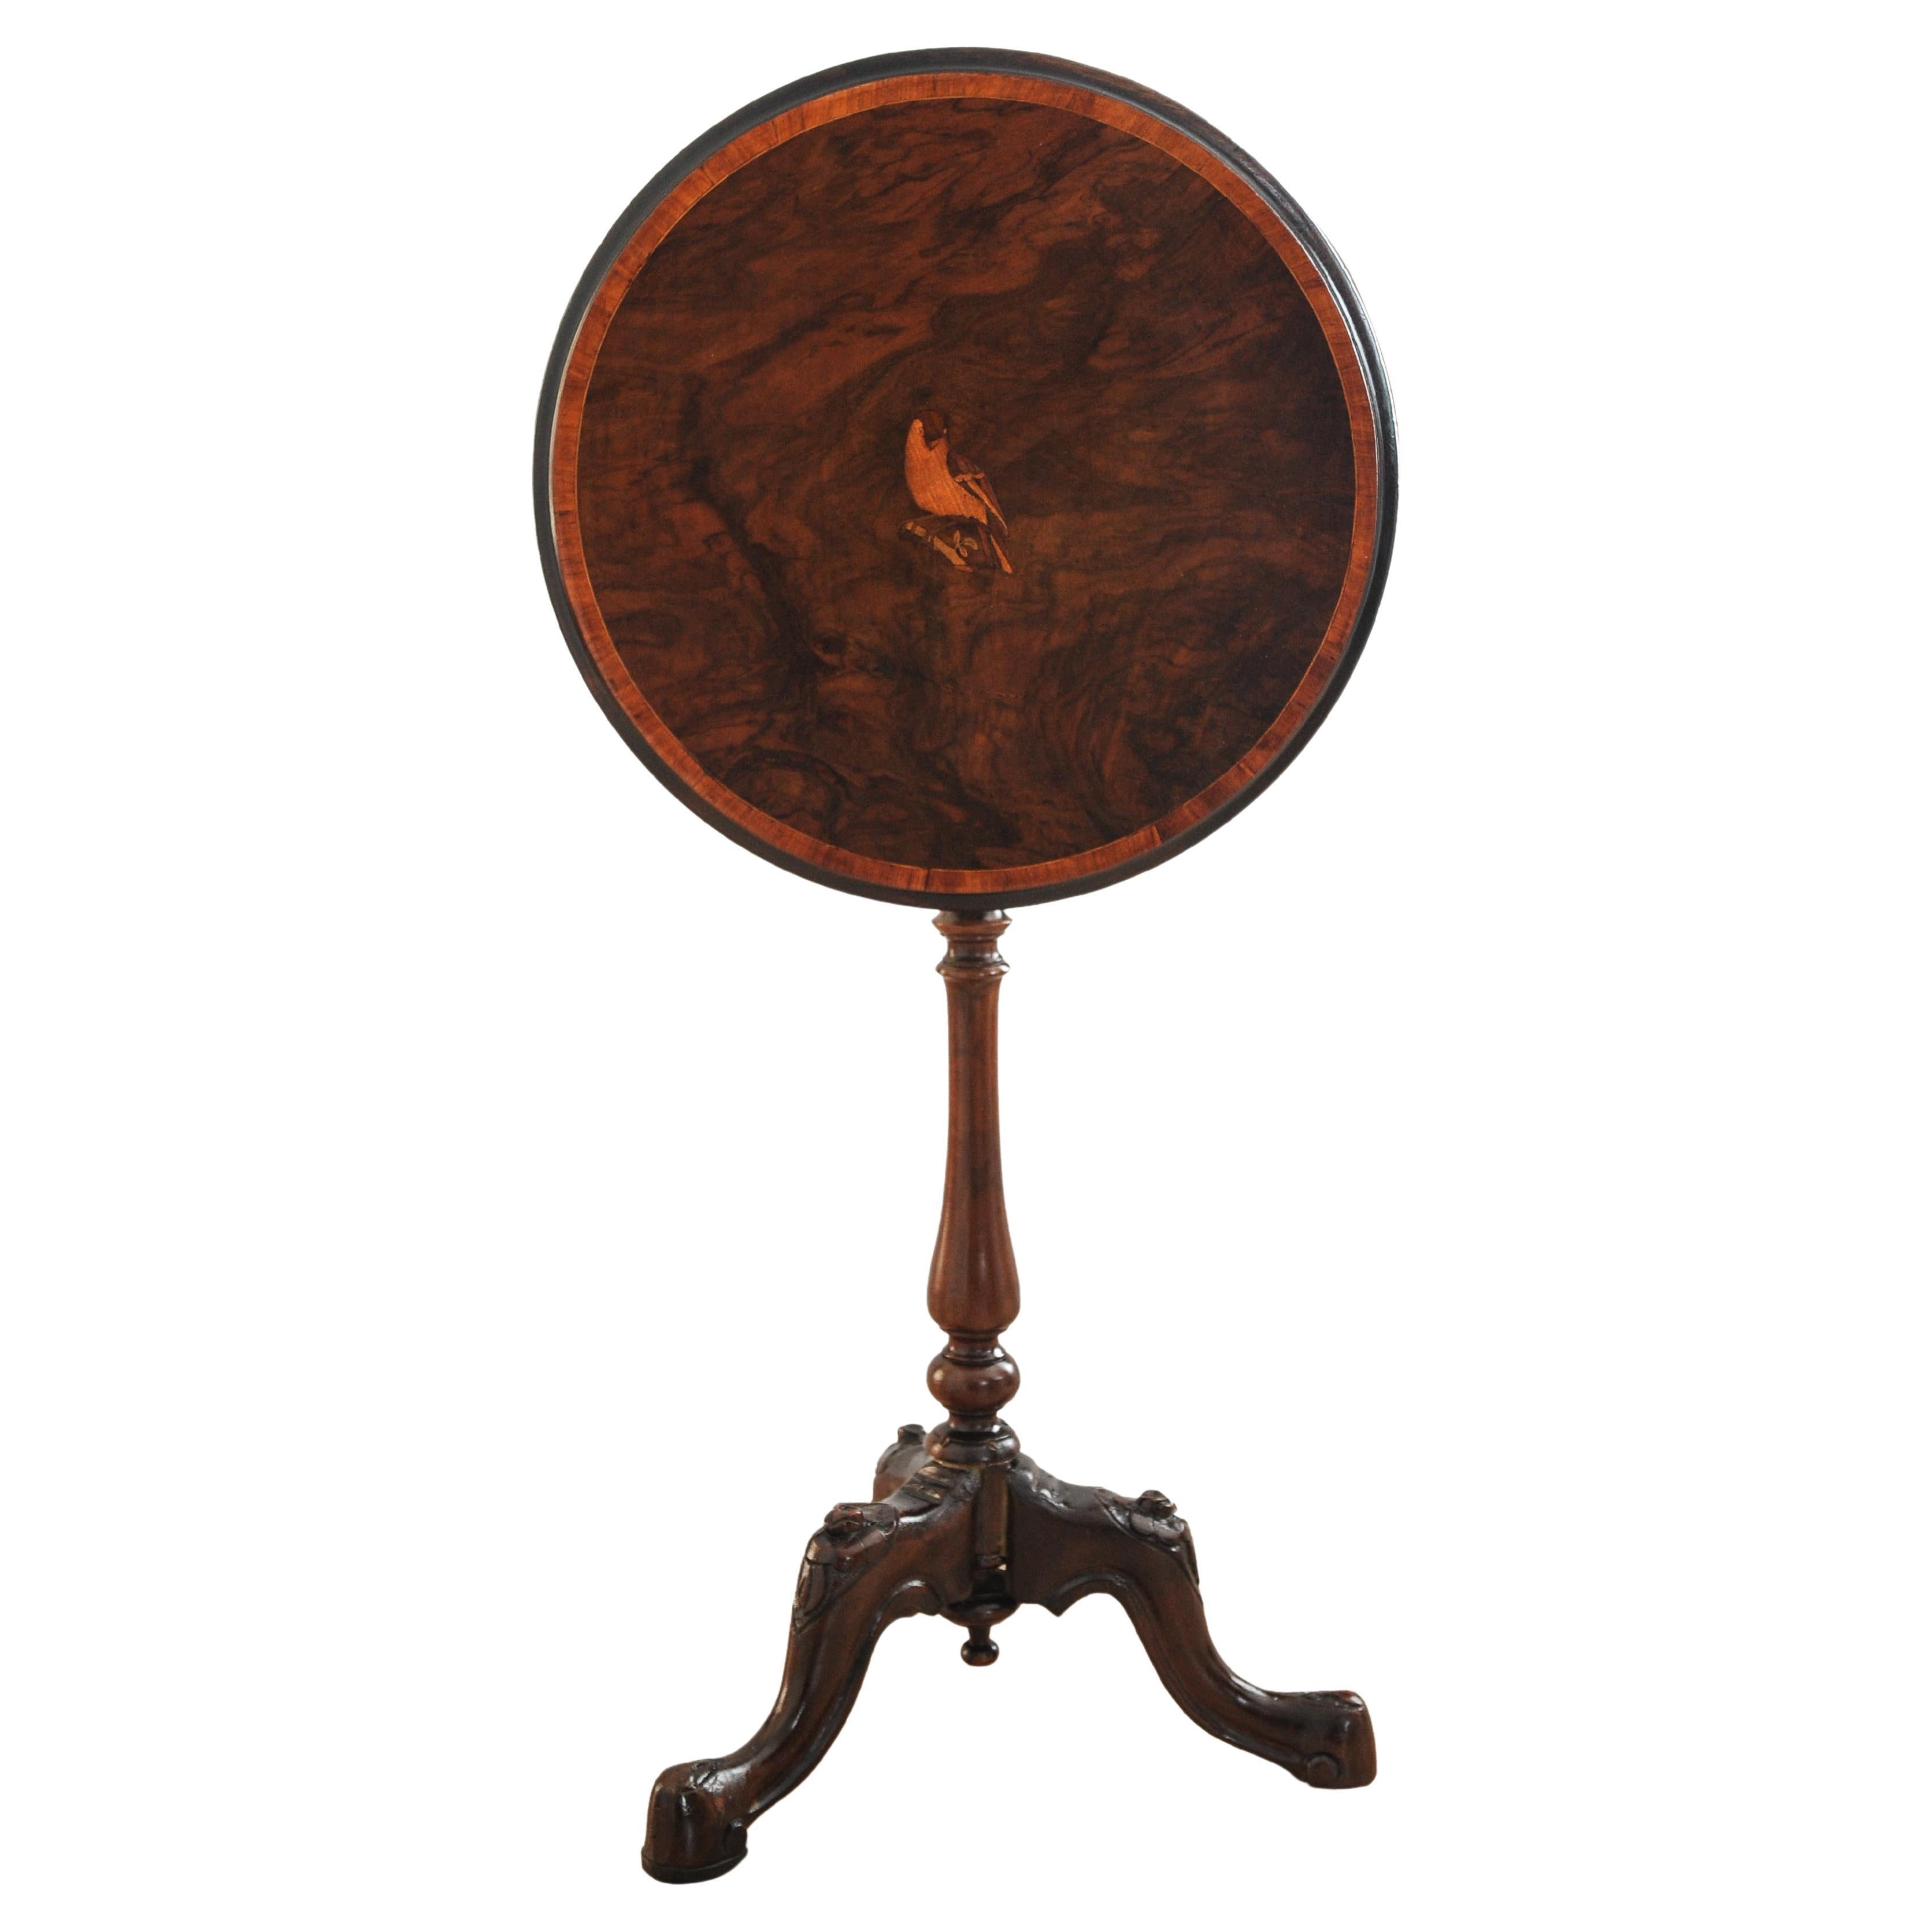 19th Century French Walnut Tilt Top Wine Table With A Central Inlaid Bird Motif Surrounded By A ​Satinwood Banded Top

With a Tripod Support Base, & Brass Button To Secure Top


